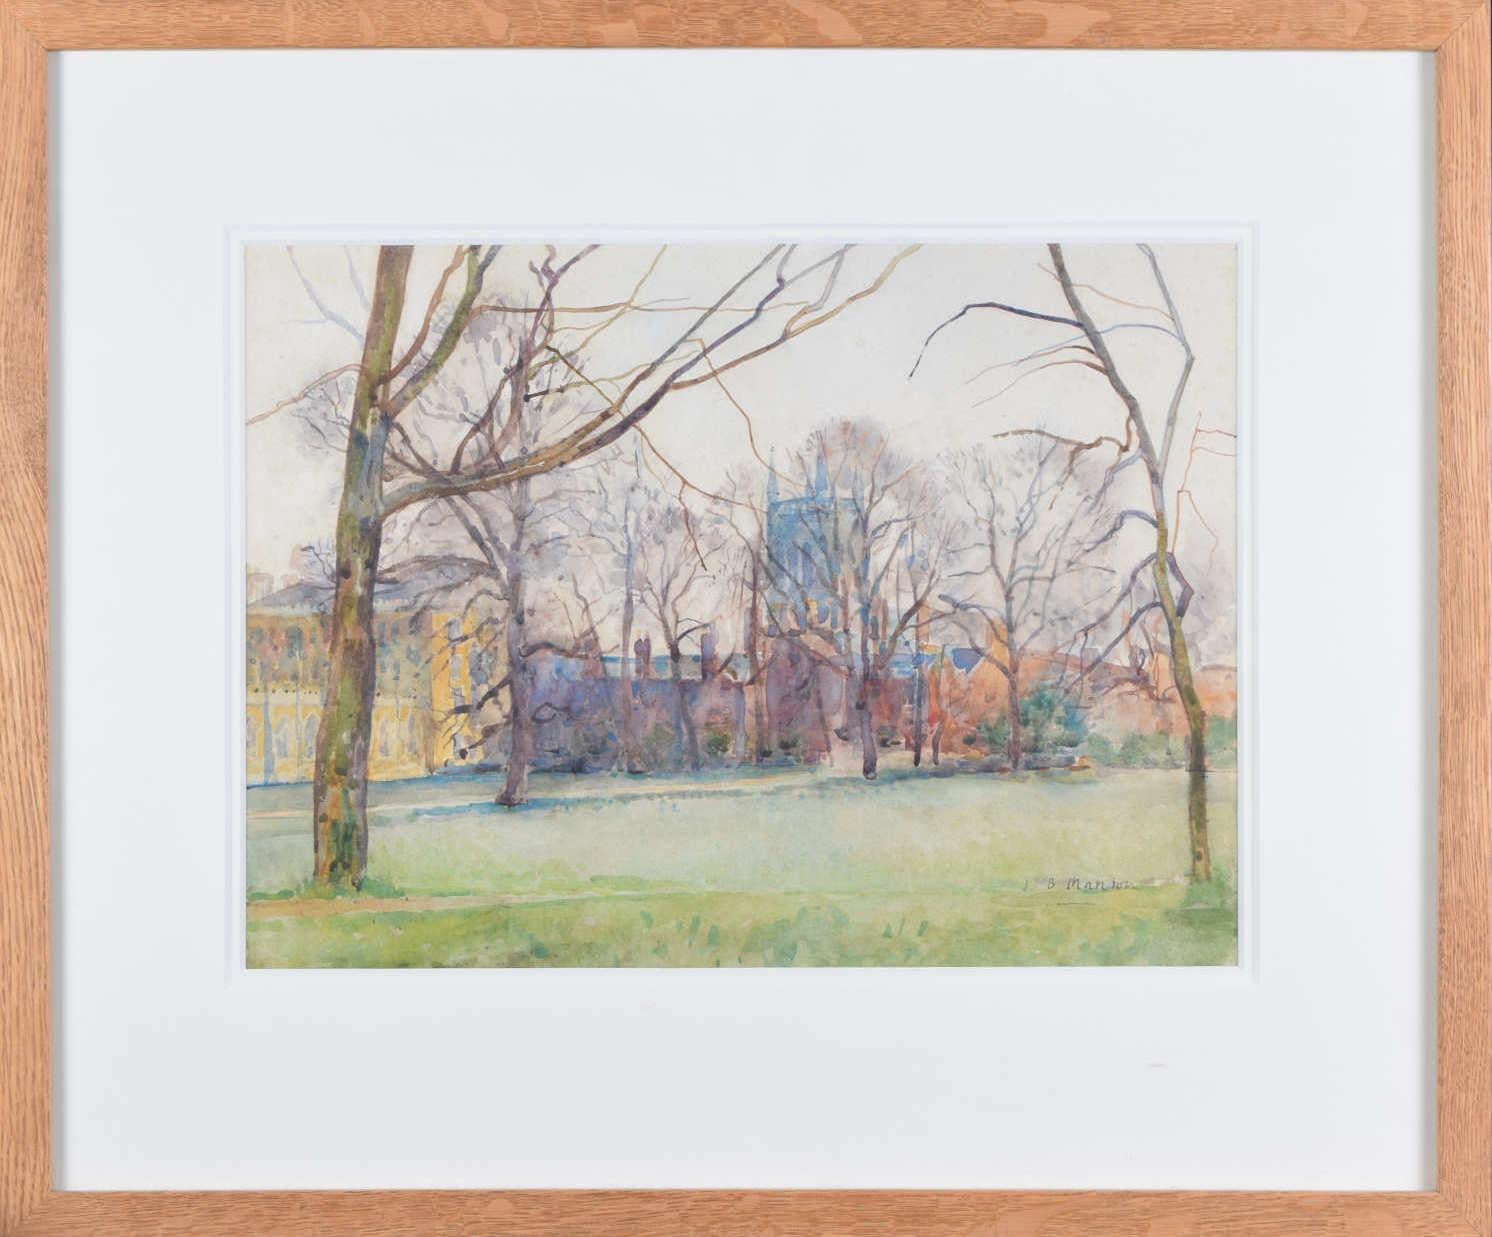 To see our other views of Oxford and Cambridge, scroll down to "More from this Seller" and below it click on "See all from this Seller" - or send us a message if you cannot find the view you want.

James Bolivar Manson (1879 – 1945)
St John’s